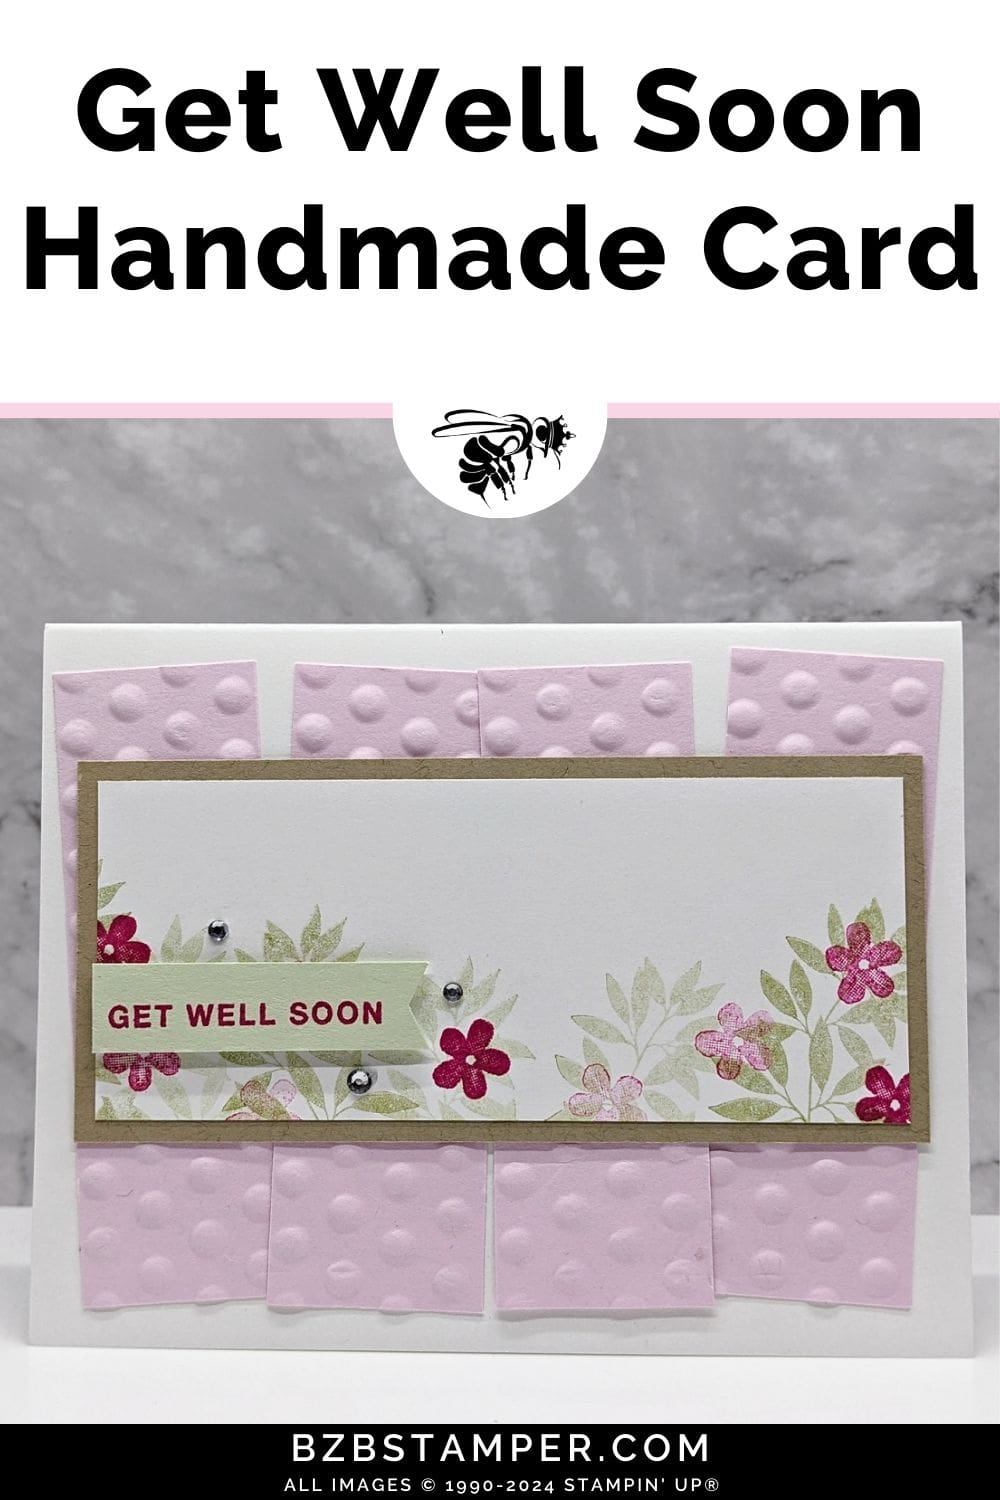 Get Well Card using the Darling Details Stamp Set  in pinks and soft green.  Embossed layer with flowers and leaves on a Kraft cardstock mat.